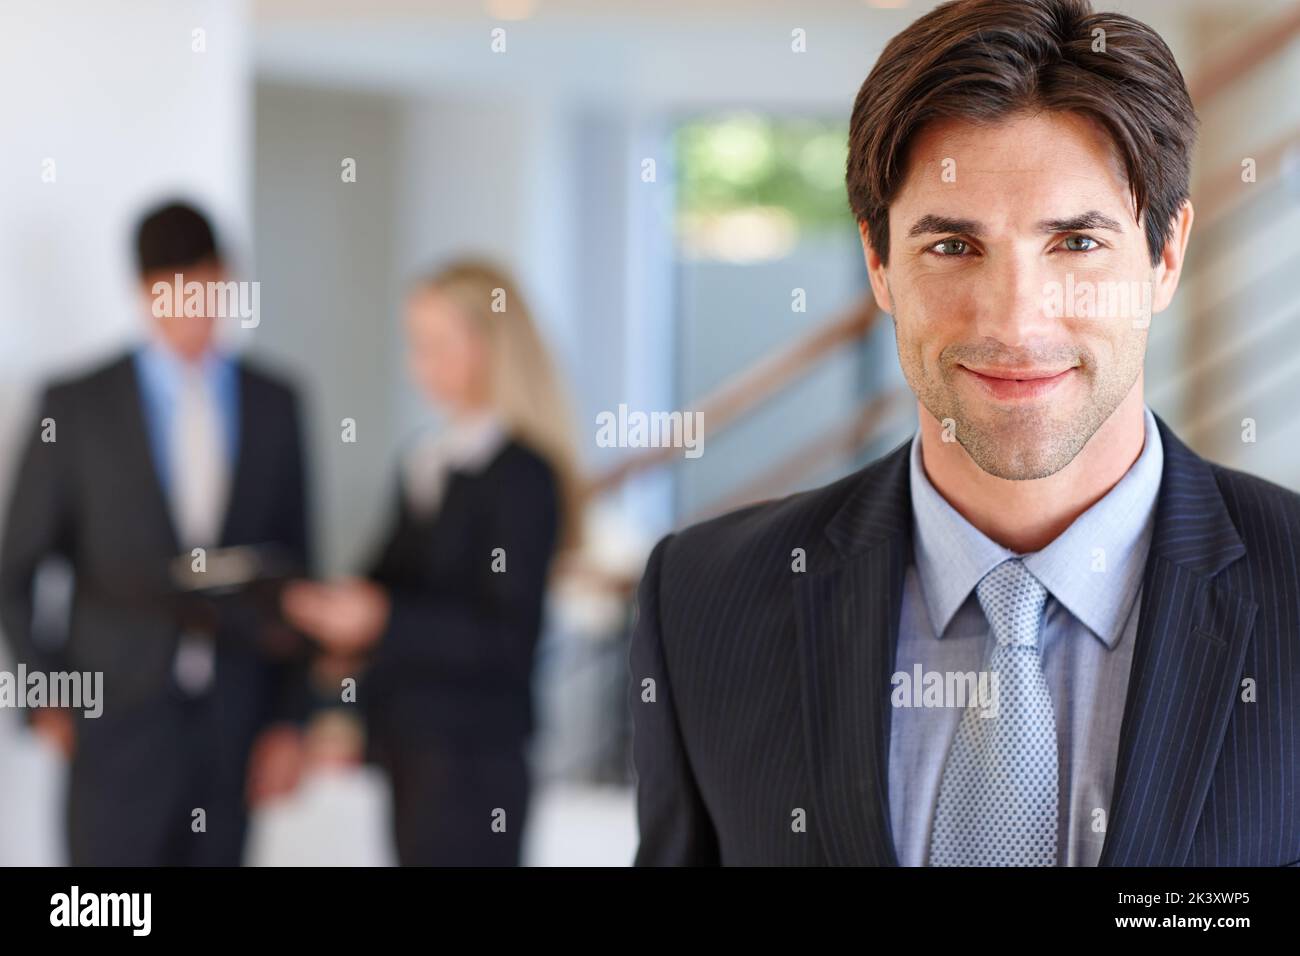 Business come naturally to him. Portrait of a businessman standing indoors with two colleagues in the background. Stock Photo